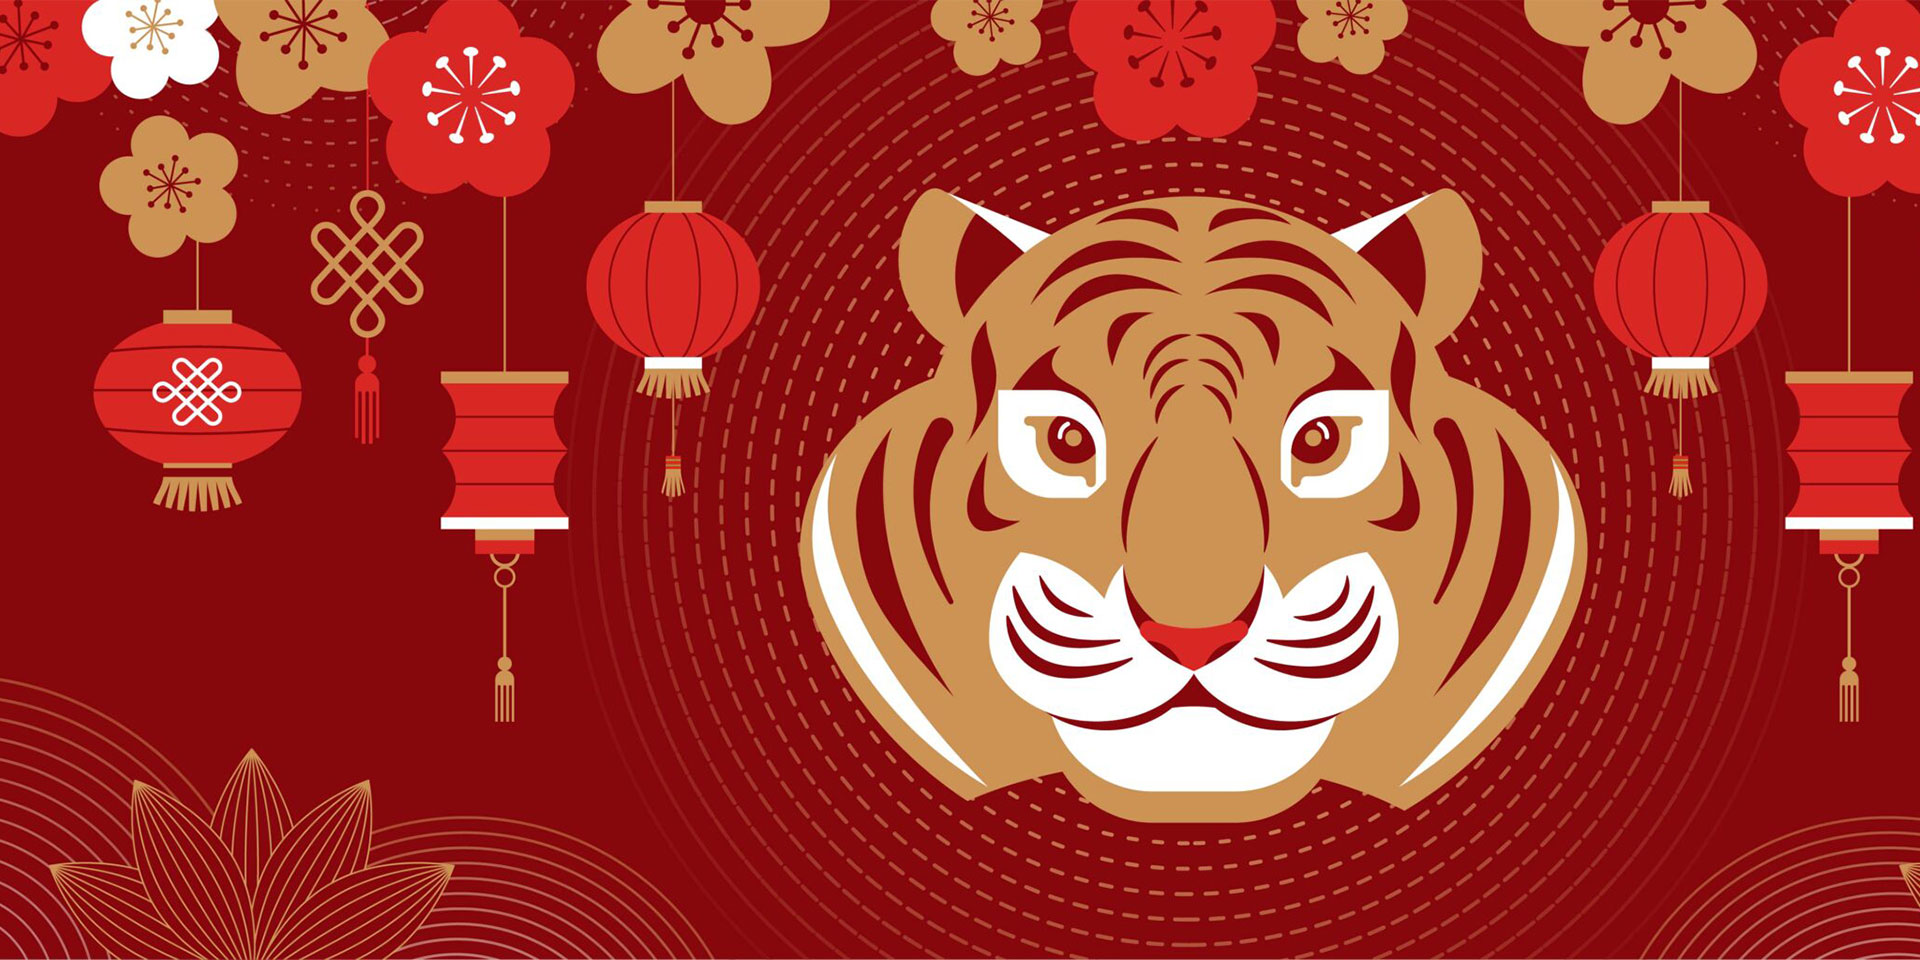 The Lunar New Year & its colors